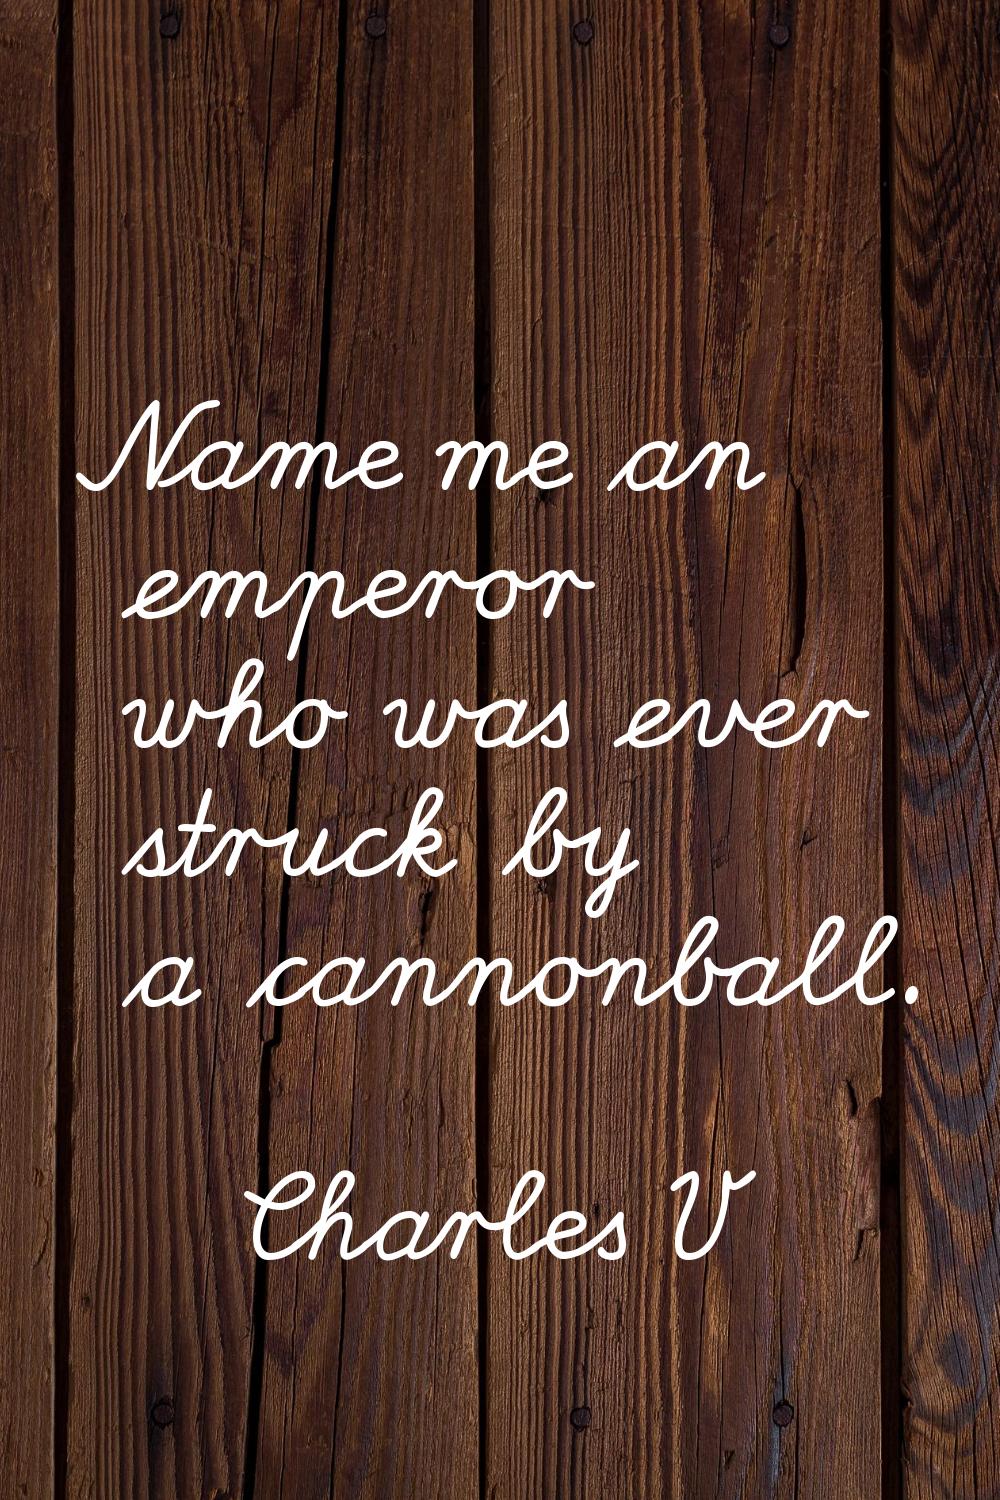 Name me an emperor who was ever struck by a cannonball.